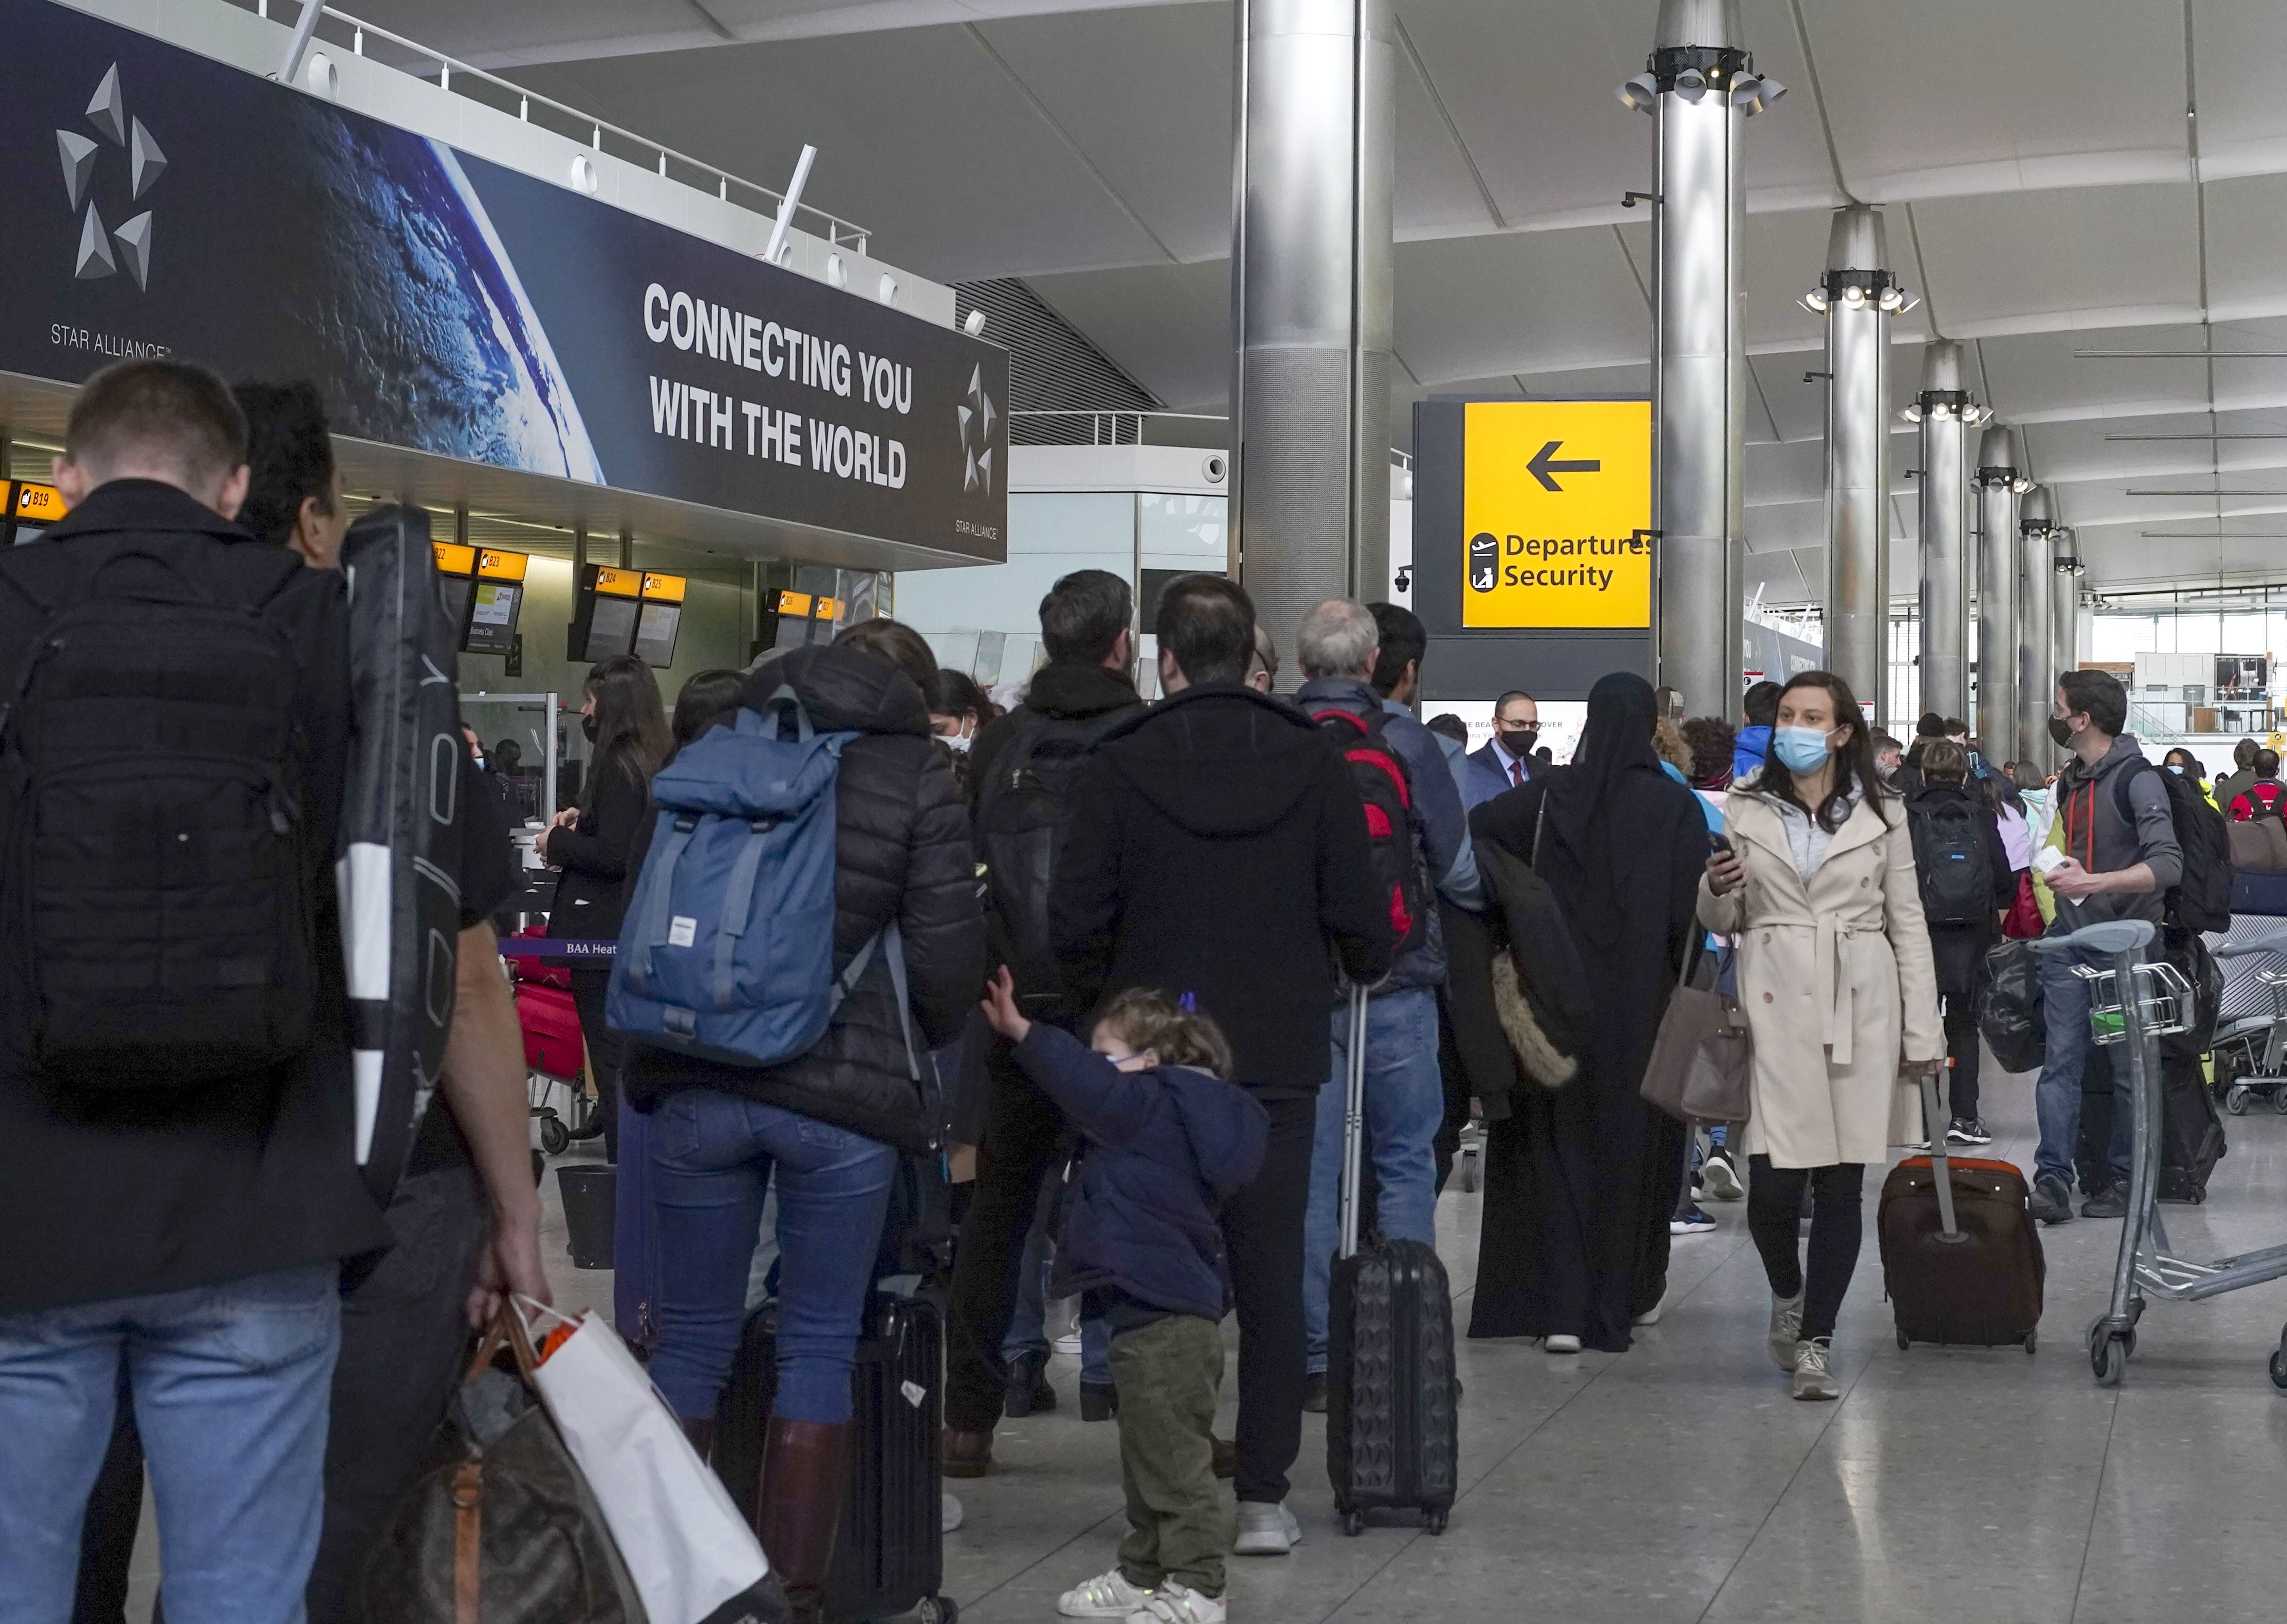 Holidaymakers faced chaos in 2022 after flights were cancelled and cross-Channel rail services were hit by major delays